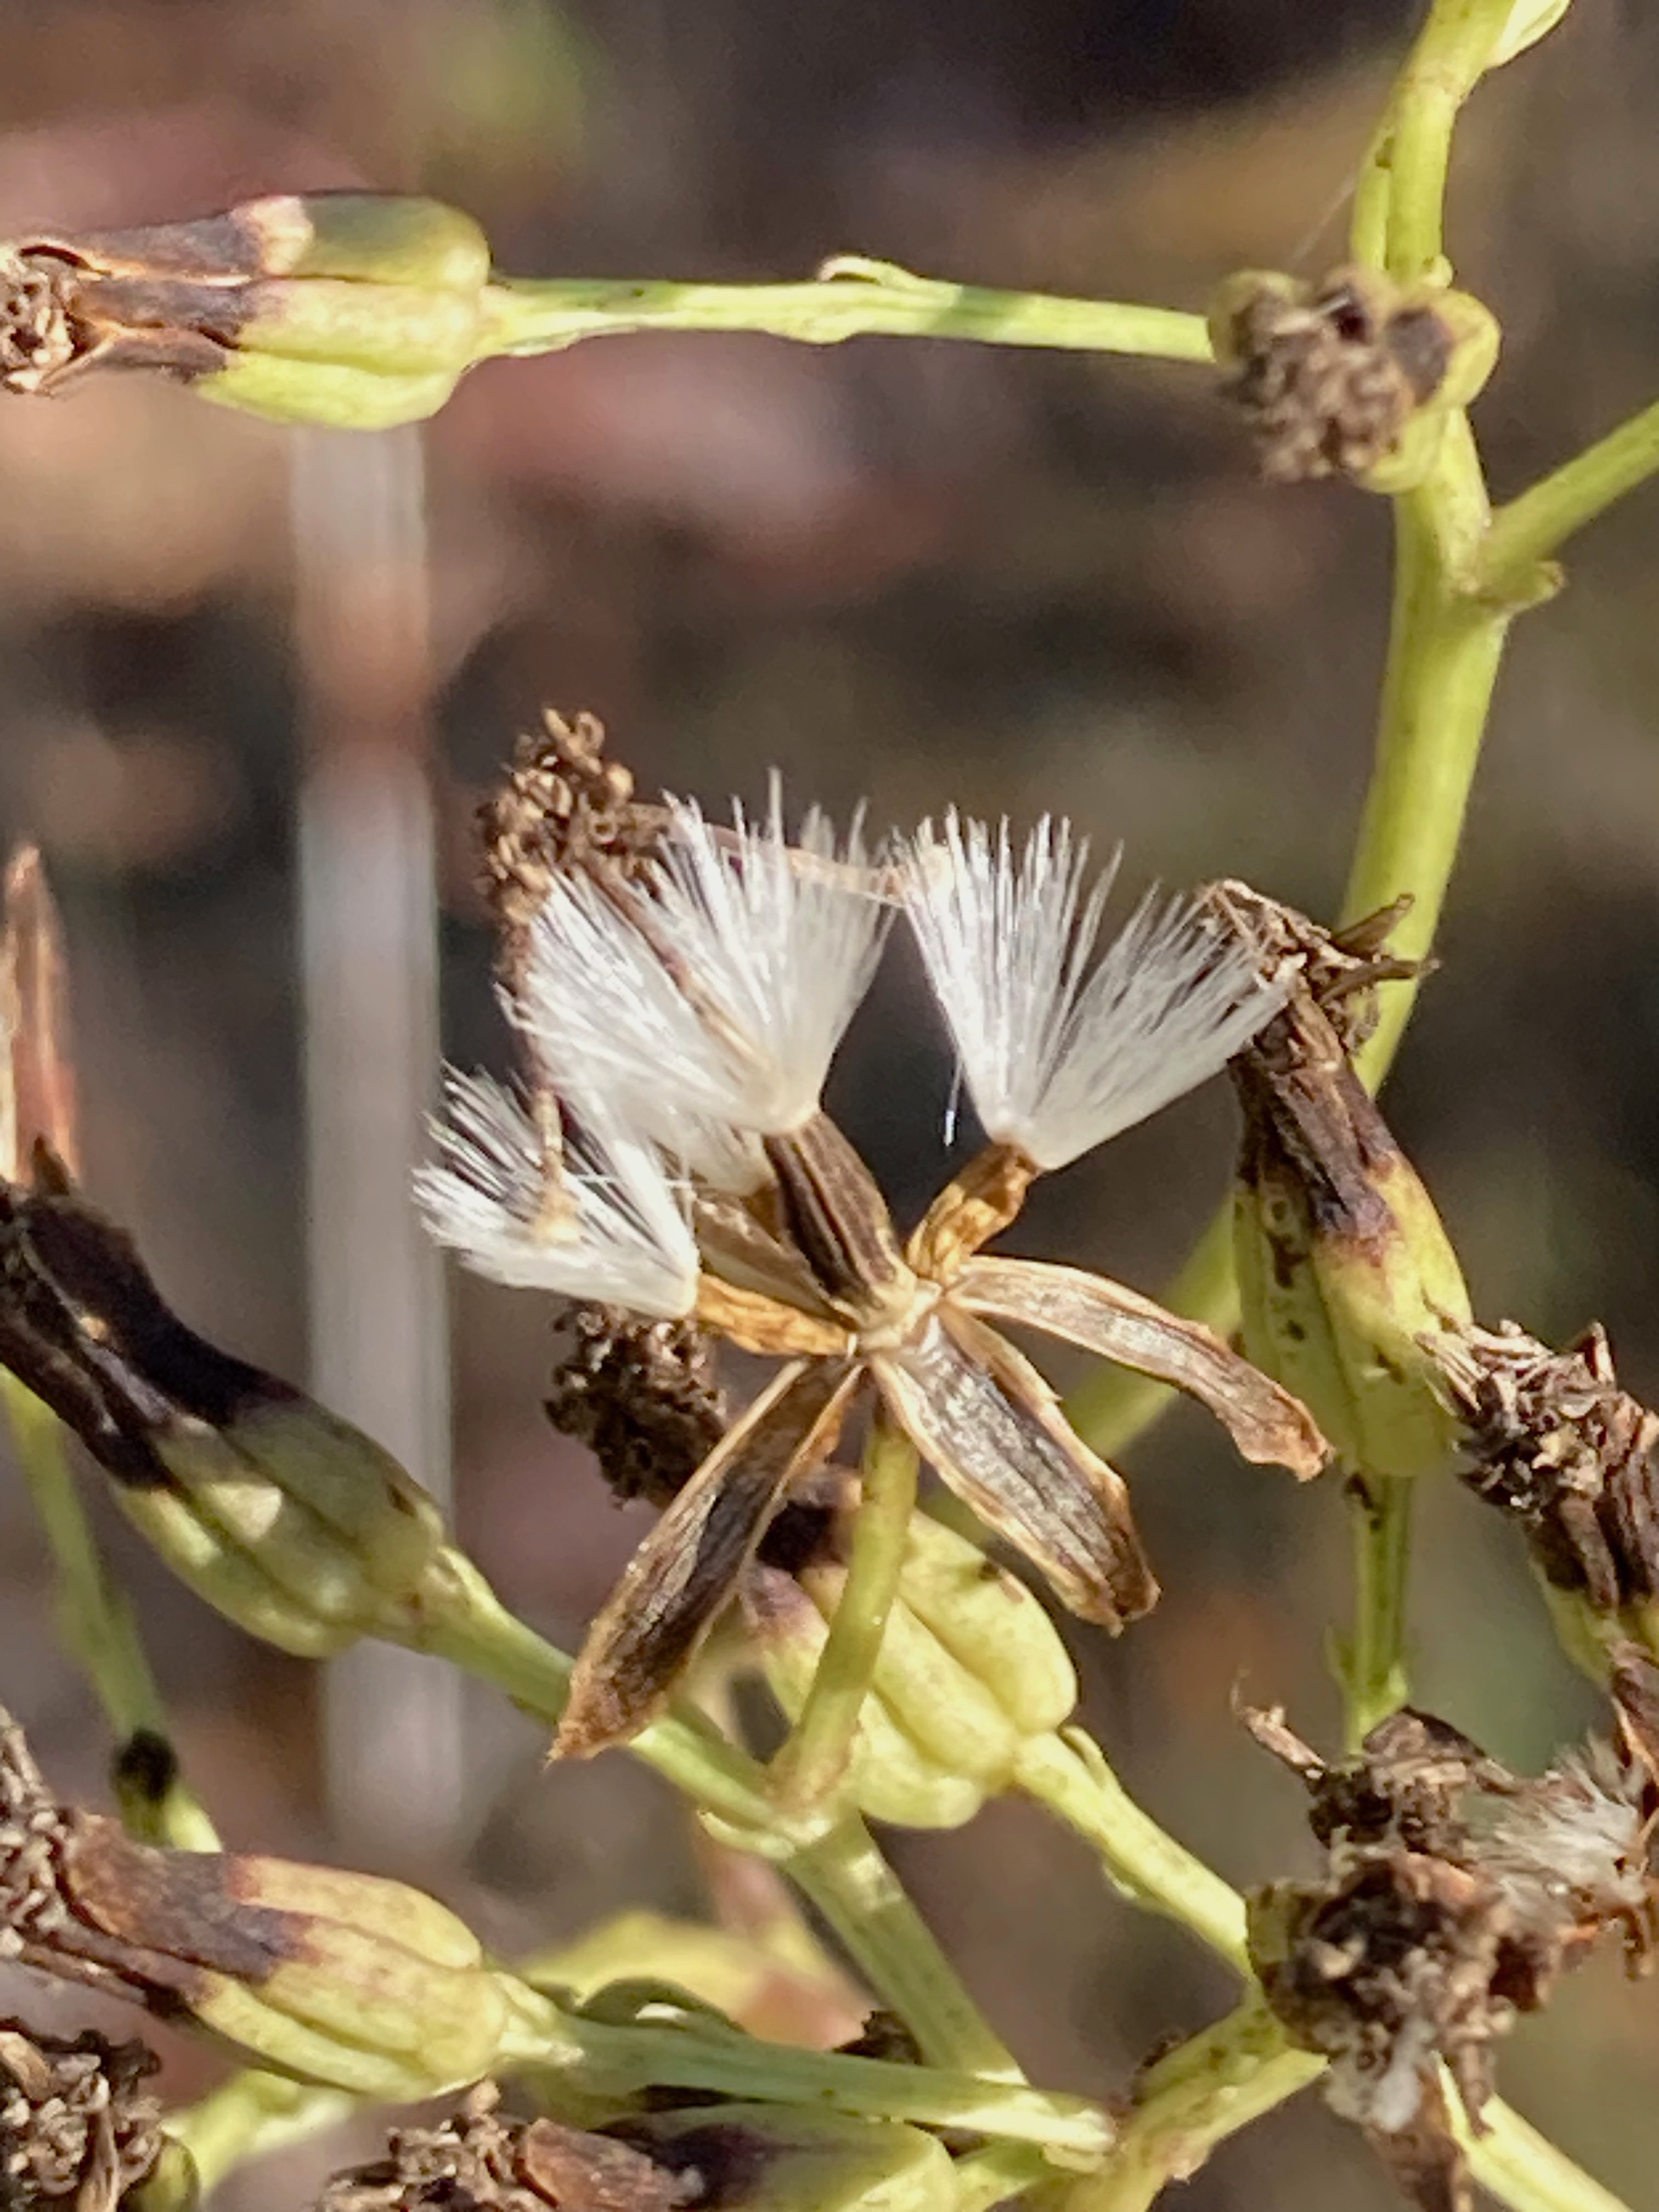 The Scientific Name is Arnoglossum atriplicifolium [= Cacalia atriplicifolia]. You will likely hear them called Pale Indian-plantain. This picture shows the Brown, ribbed achene with pappus (ring of fine hairs for wind dispersal). of Arnoglossum atriplicifolium [= Cacalia atriplicifolia]